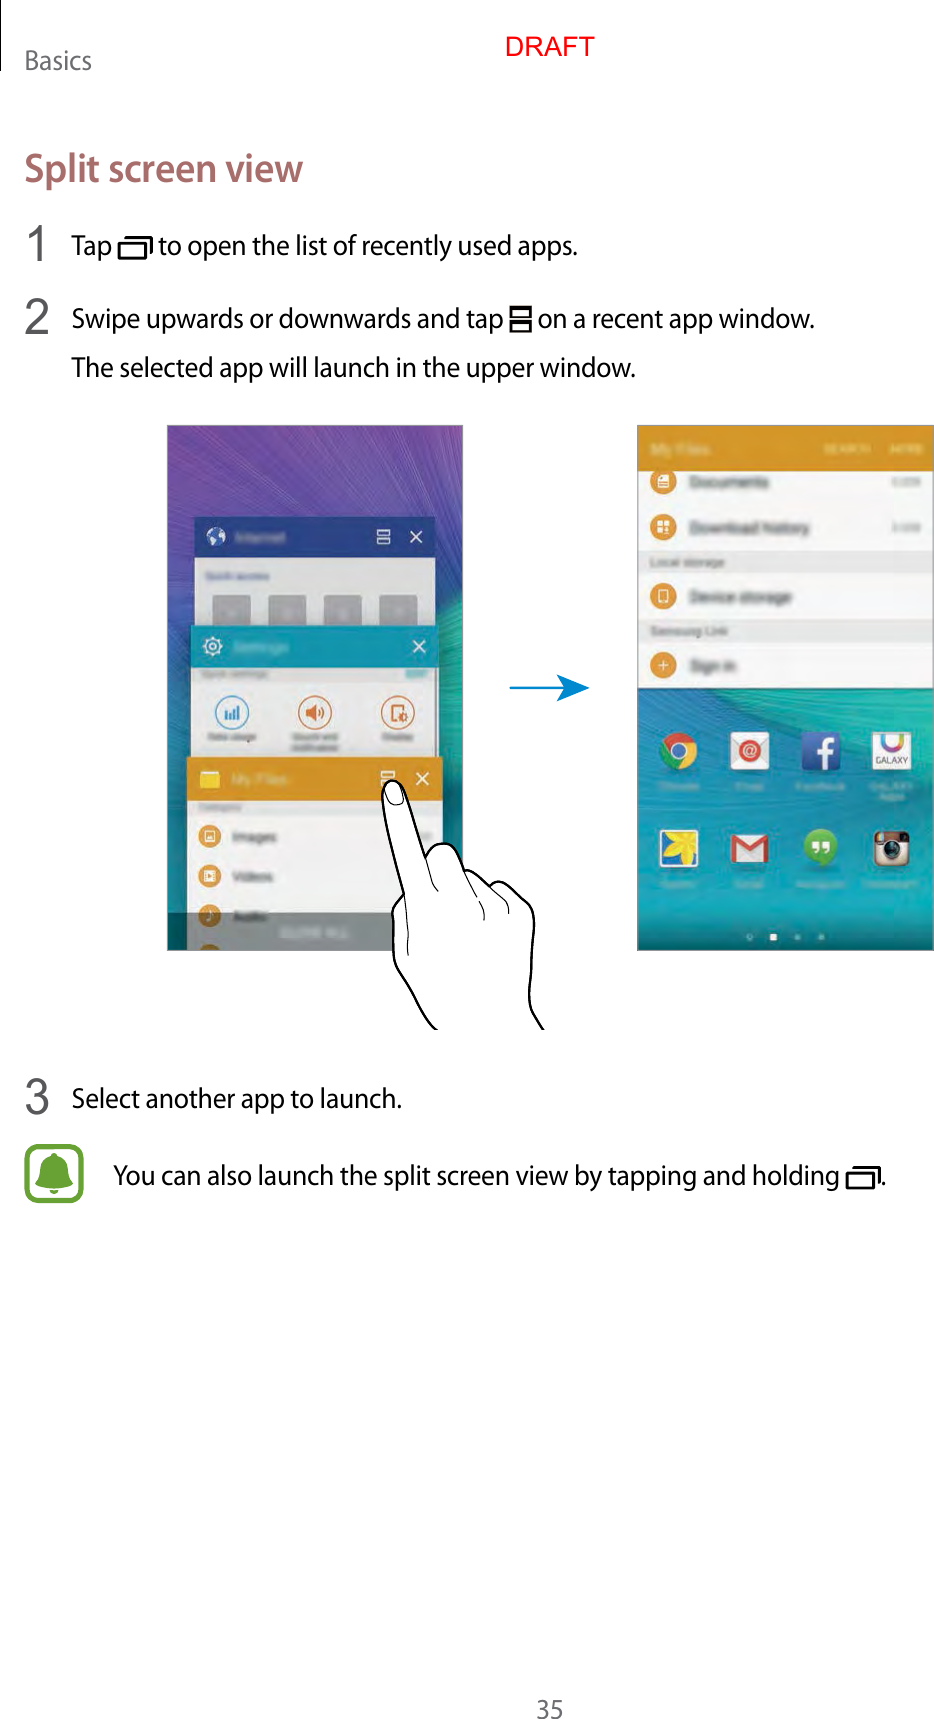 Basics35Split screen view1  Tap   to open the list of recently used apps.2  Swipe upwards or downwards and tap   on a recent app window.The selected app will launch in the upper window.3  Select another app to launch.You can also launch the split screen view by tapping and holding  .DRAFT